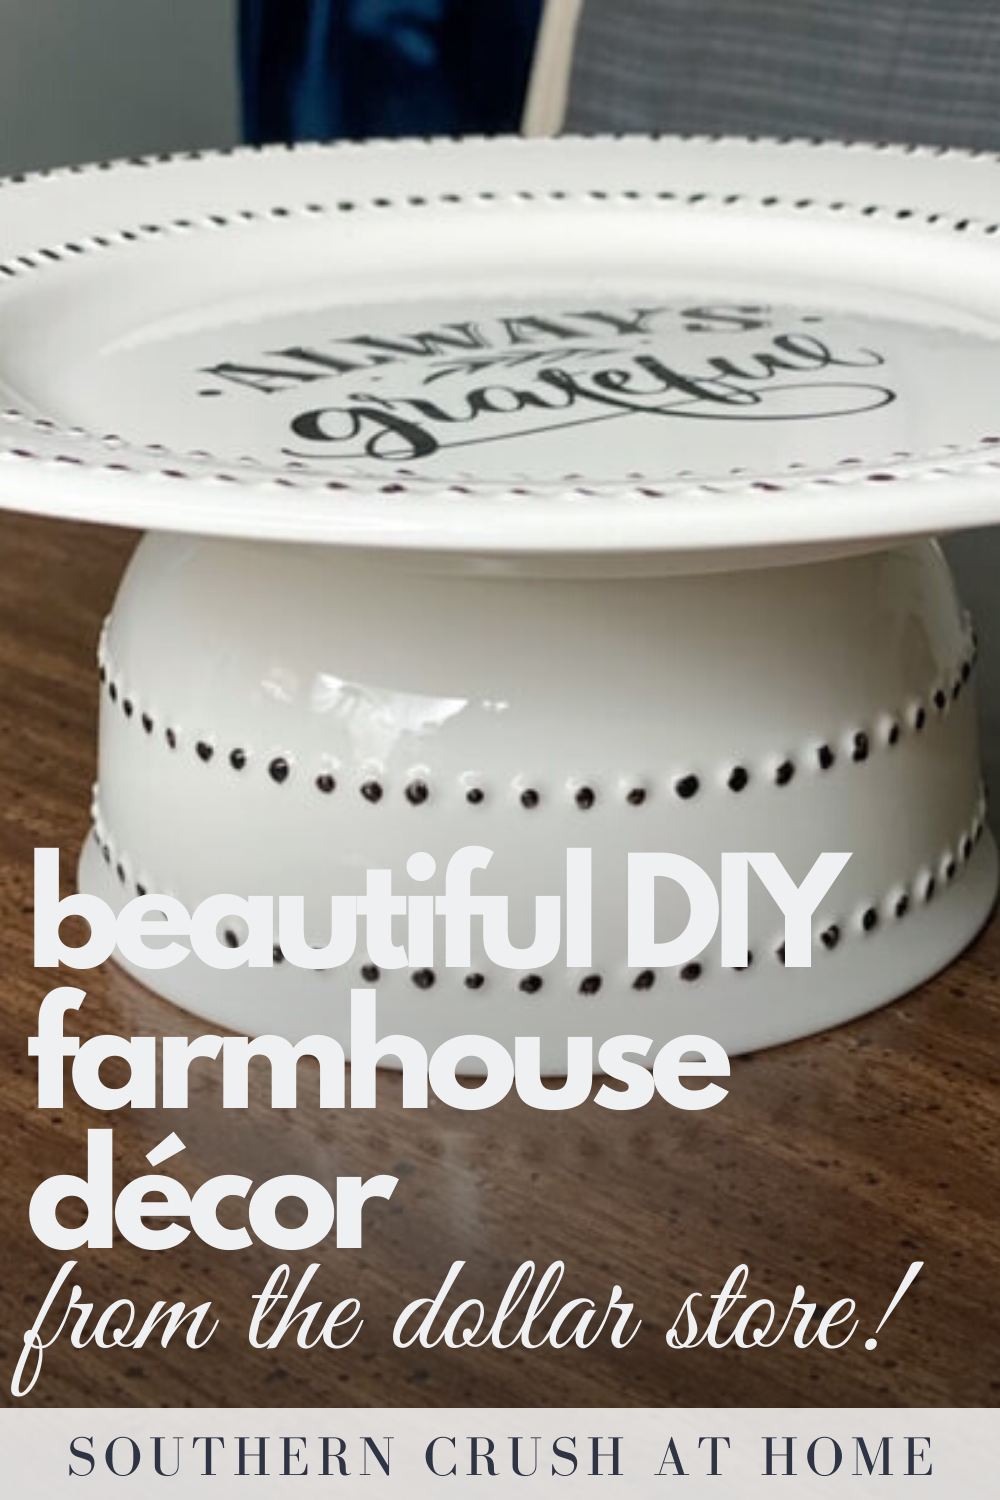 Make your own DIY farmhouse d?cor with items from the Dollar Store! | Southern Crush at Home -   17 diy christmas decorations dollar store farmhouse ideas